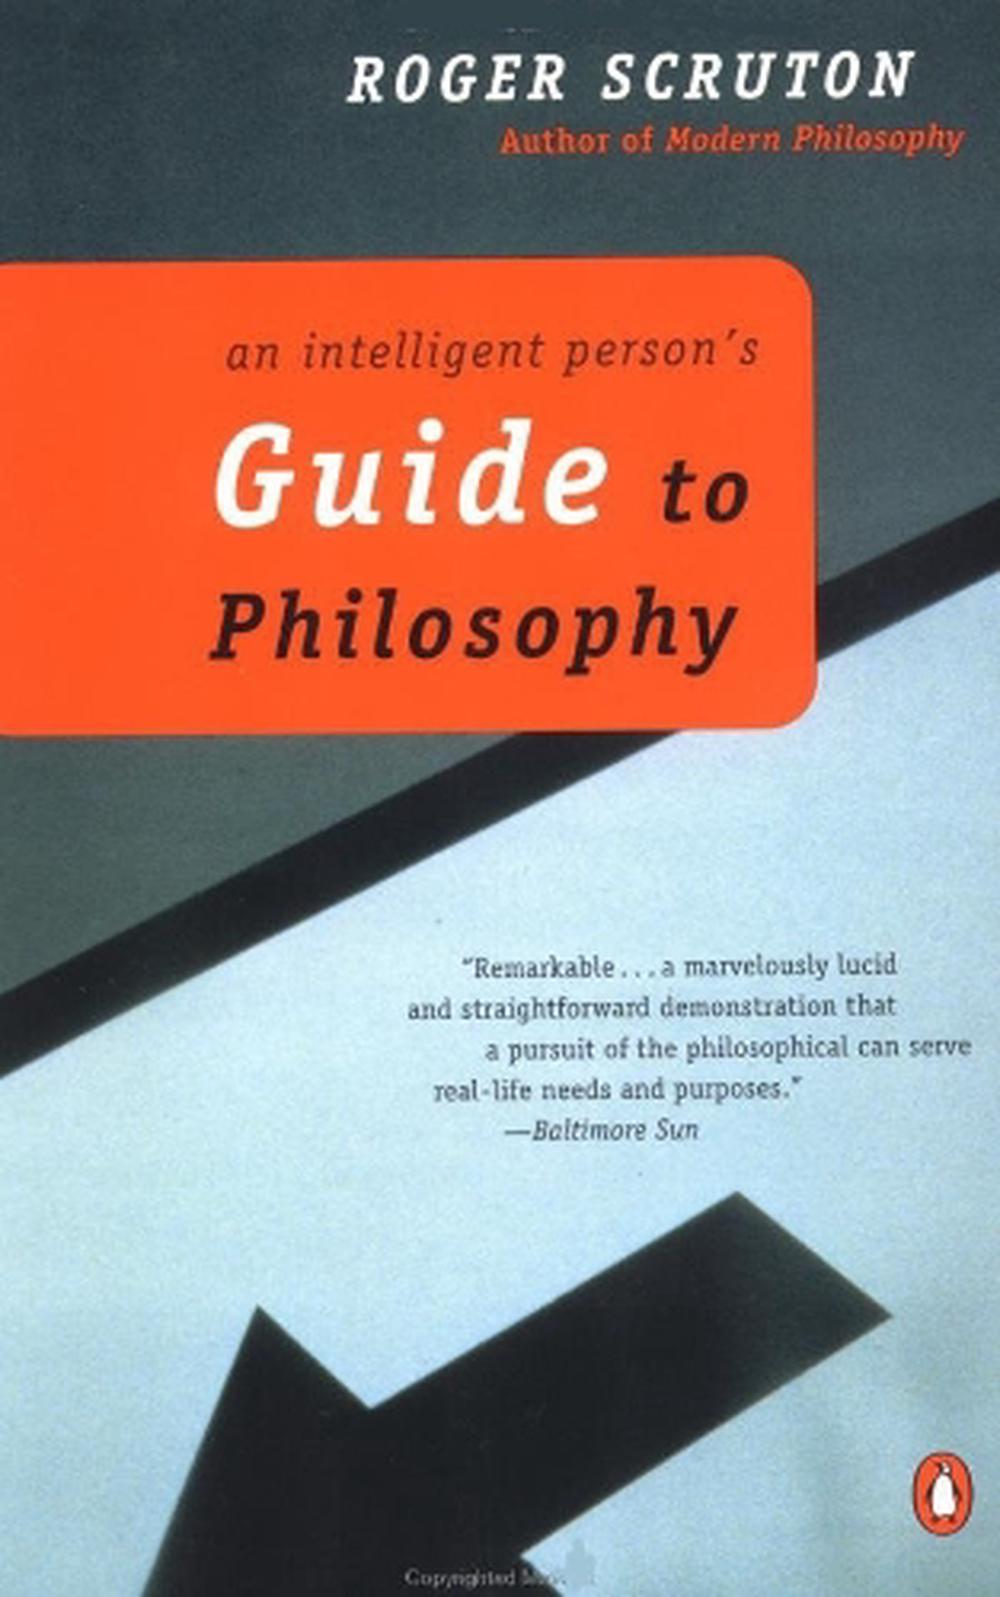 An Intelligent Person's Guide to Philosophy by Roger Scruton (English